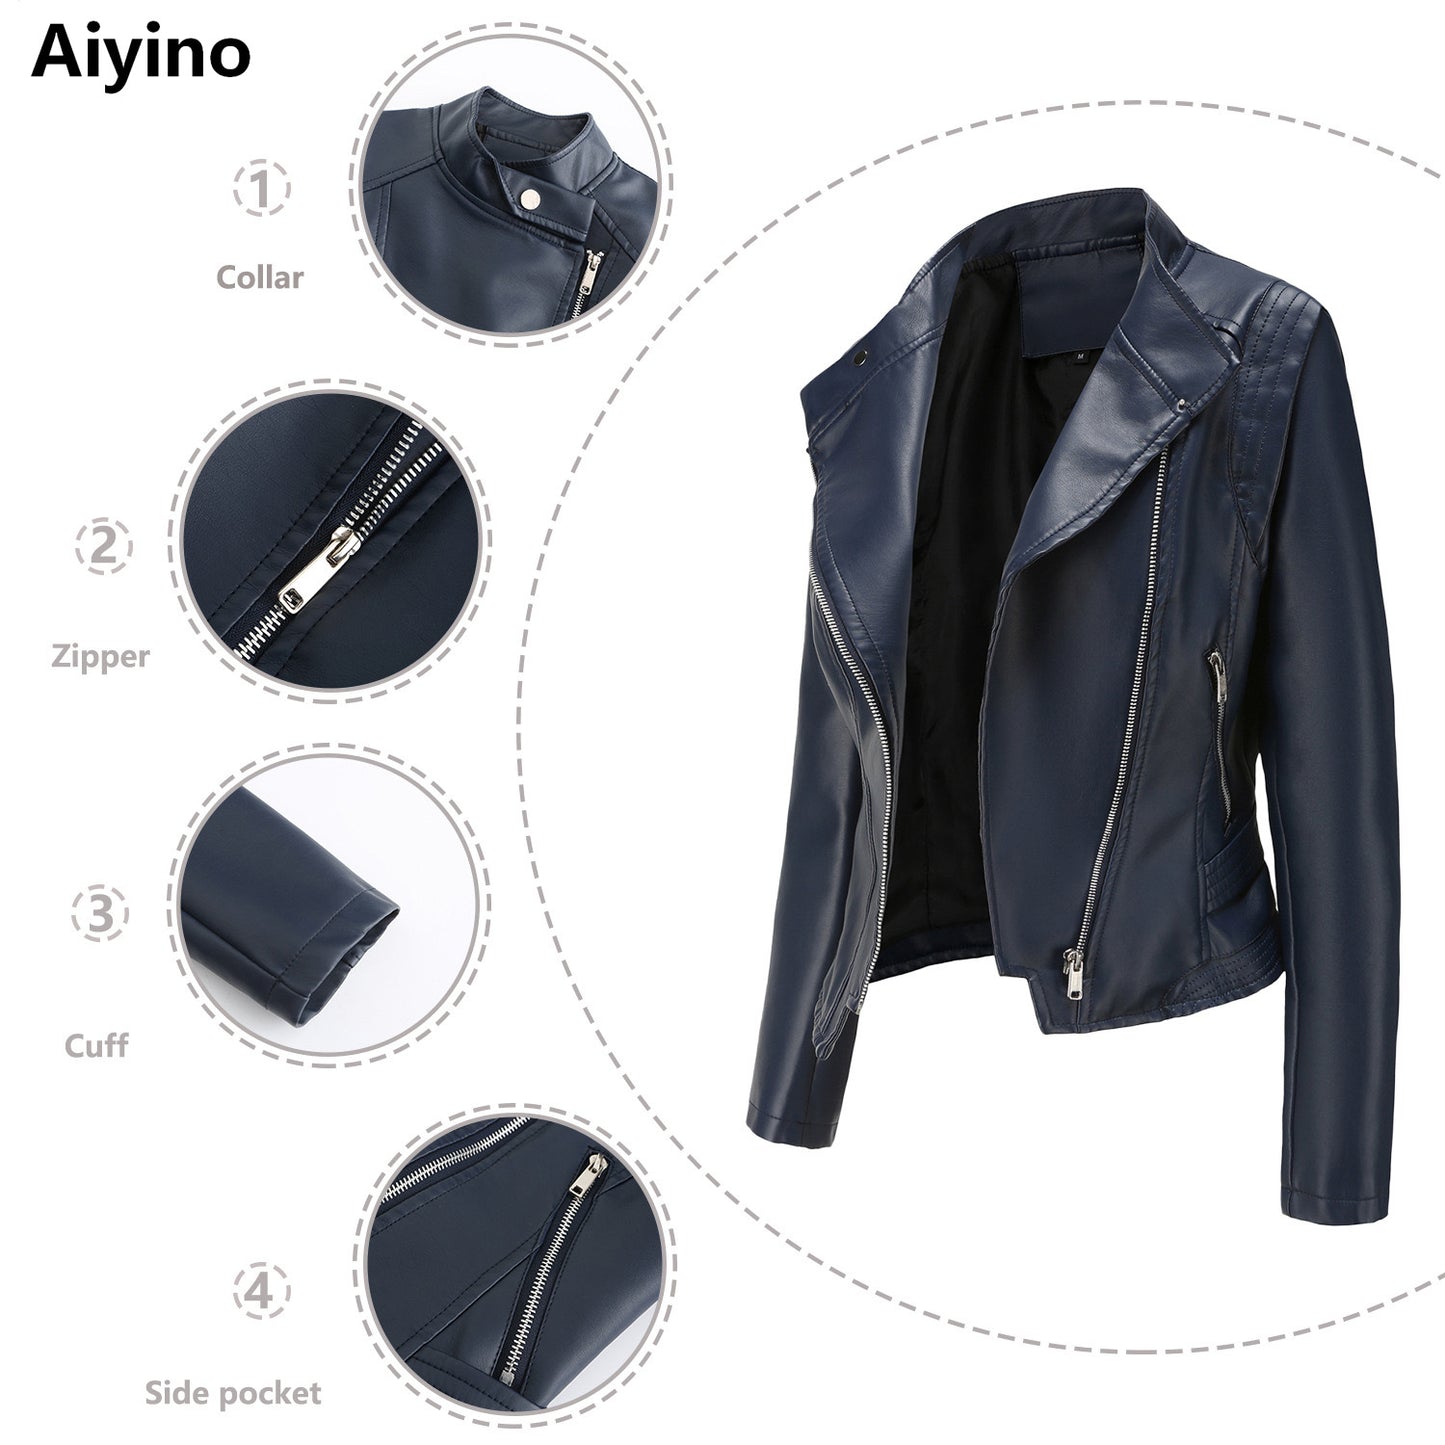 Aiyino Women's Leather Casual Jacket Fall and Winter Fashion Motorcycle Bike Coats